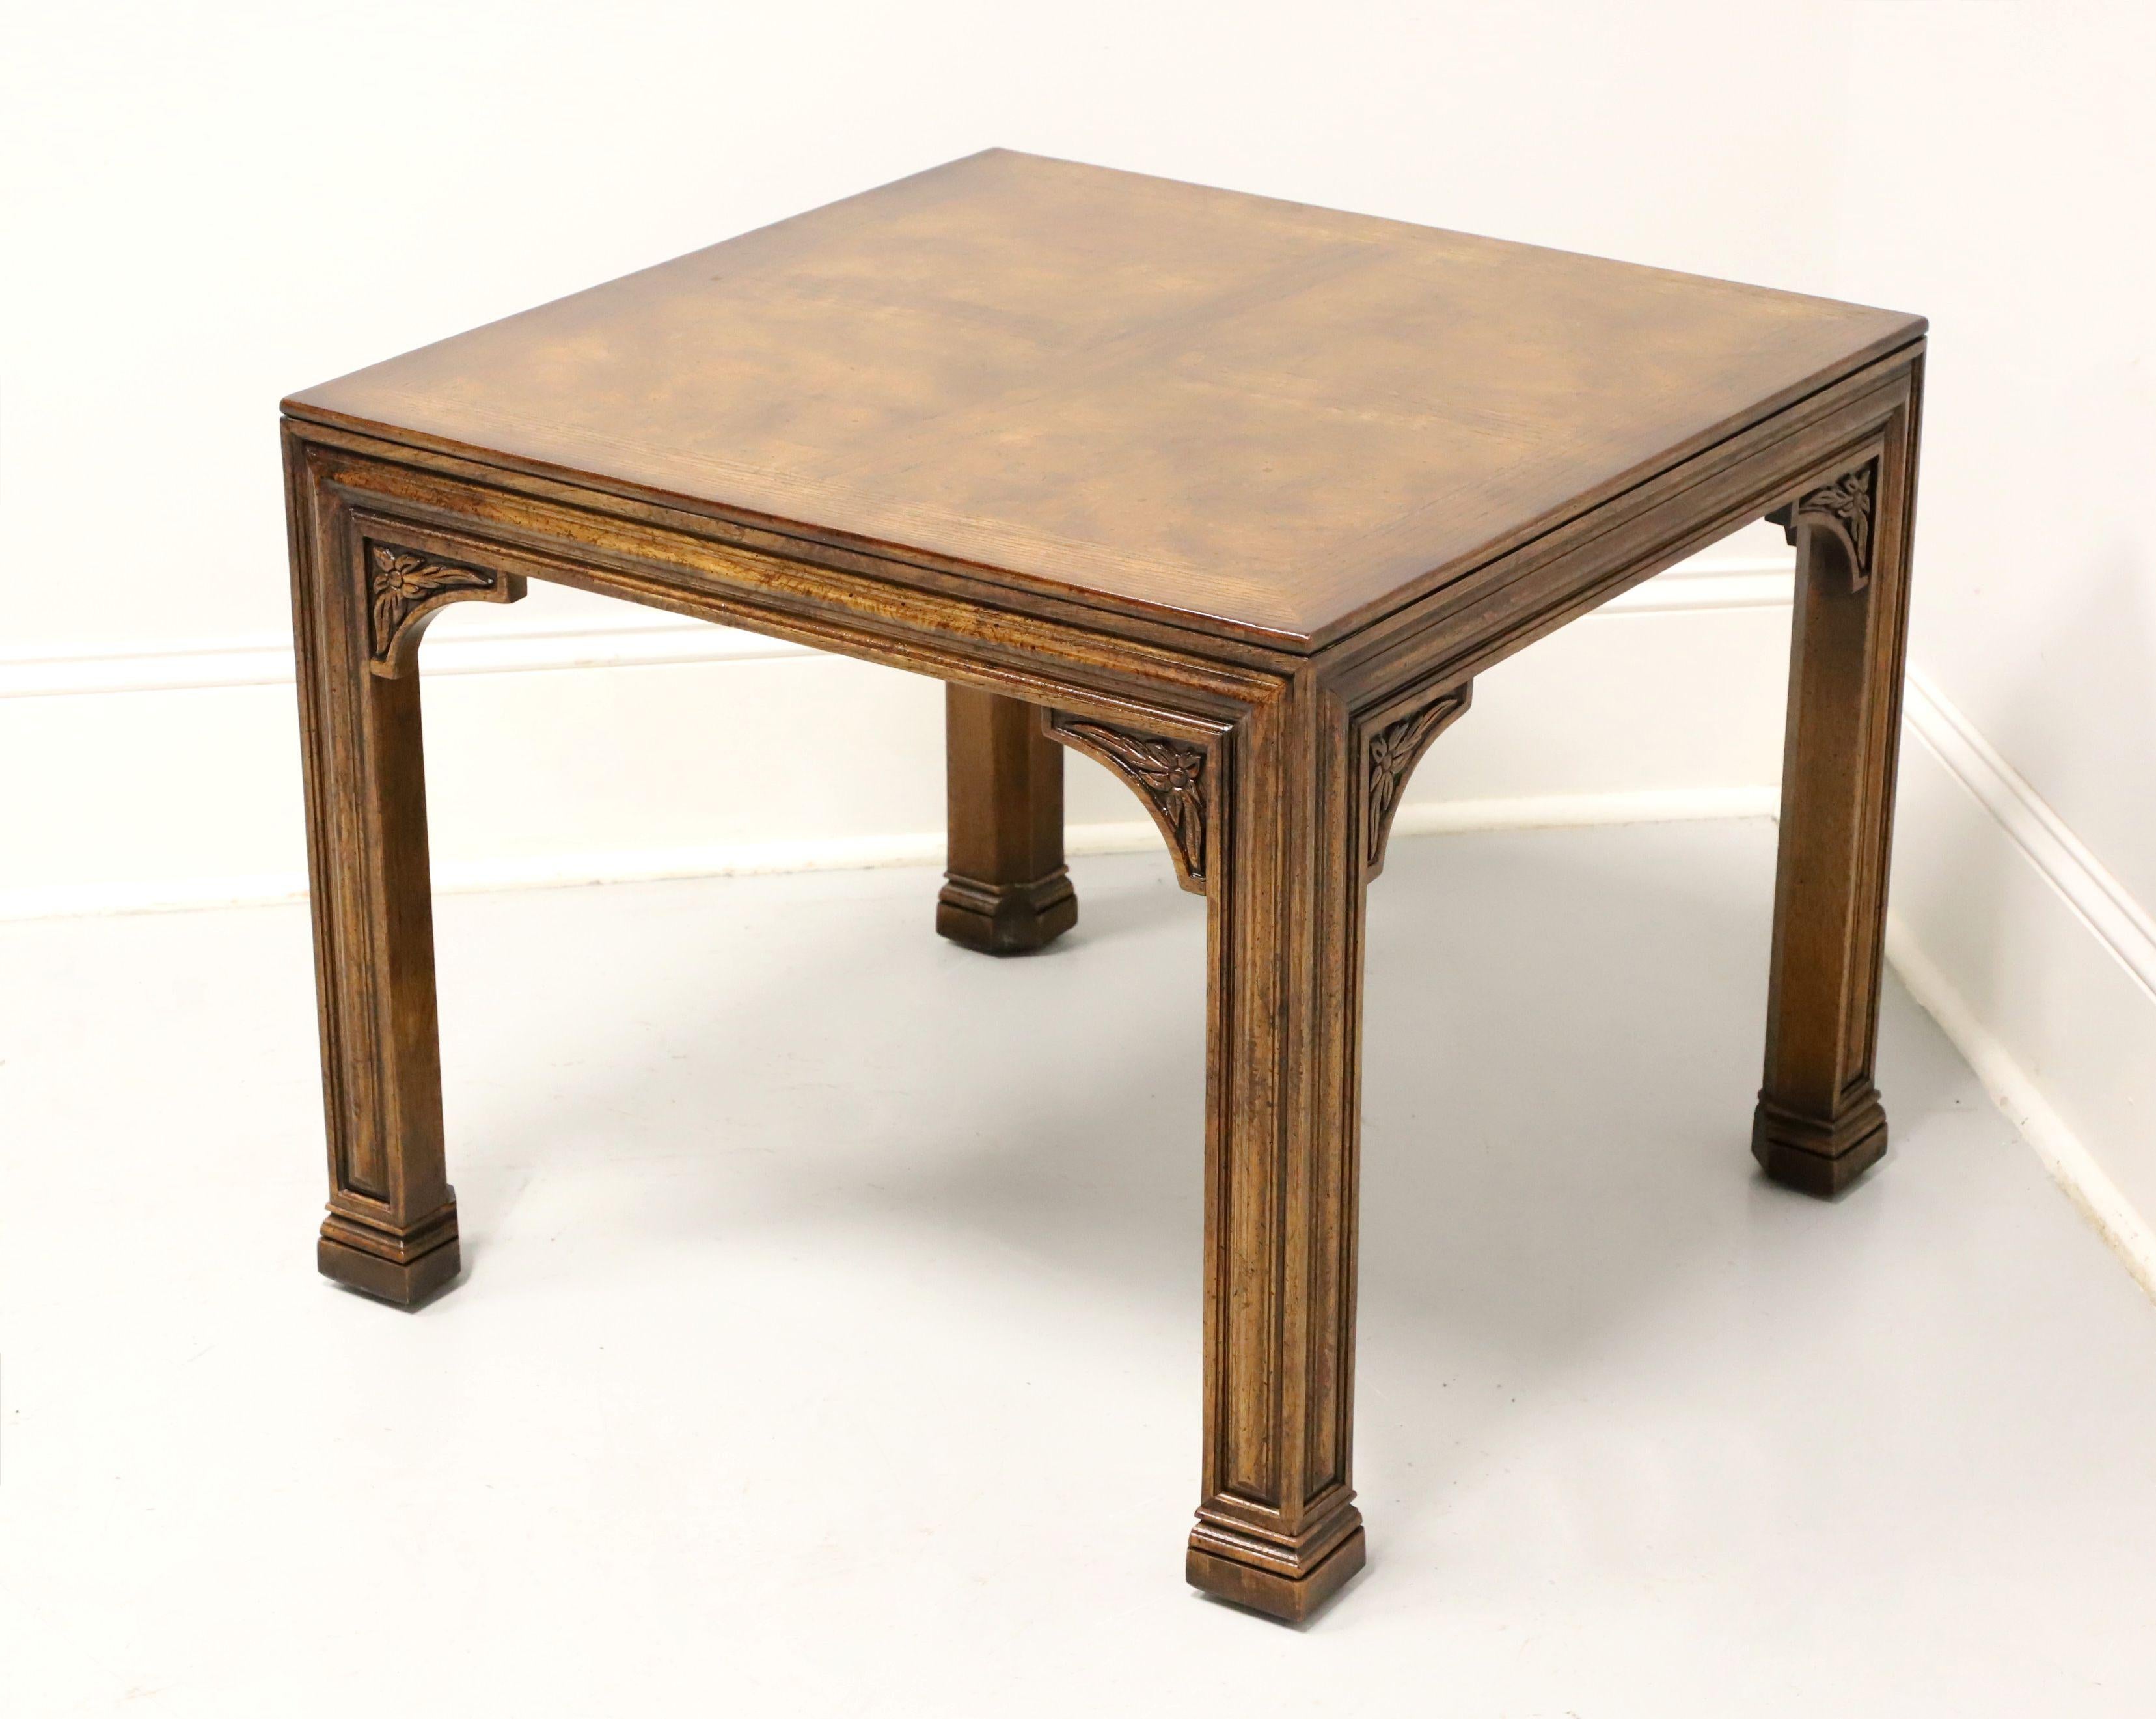 French Provincial HENREDON Burl Oak French Influenced Square Side Table